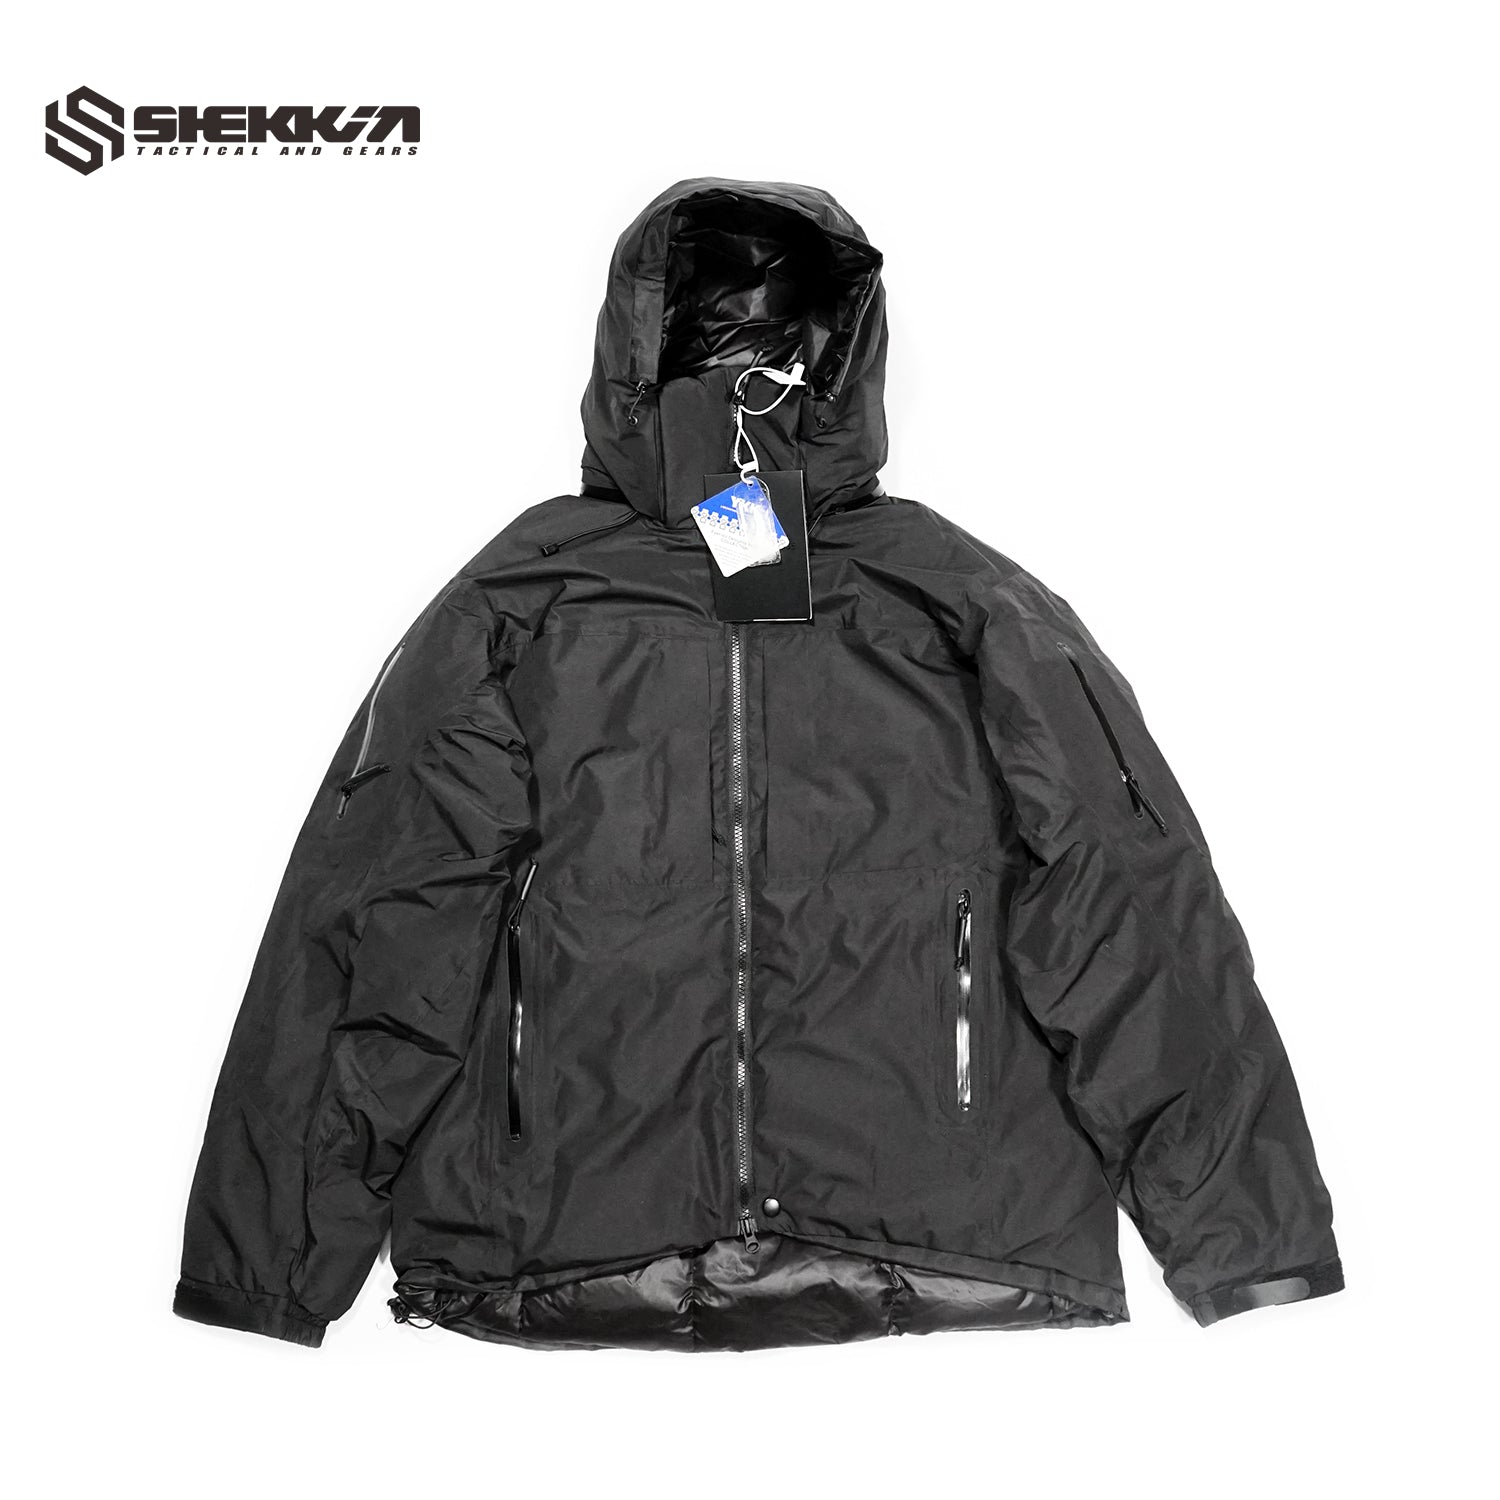 Shekkin Gears COLD LEAF COLD WX Jacket SV down feather filled.